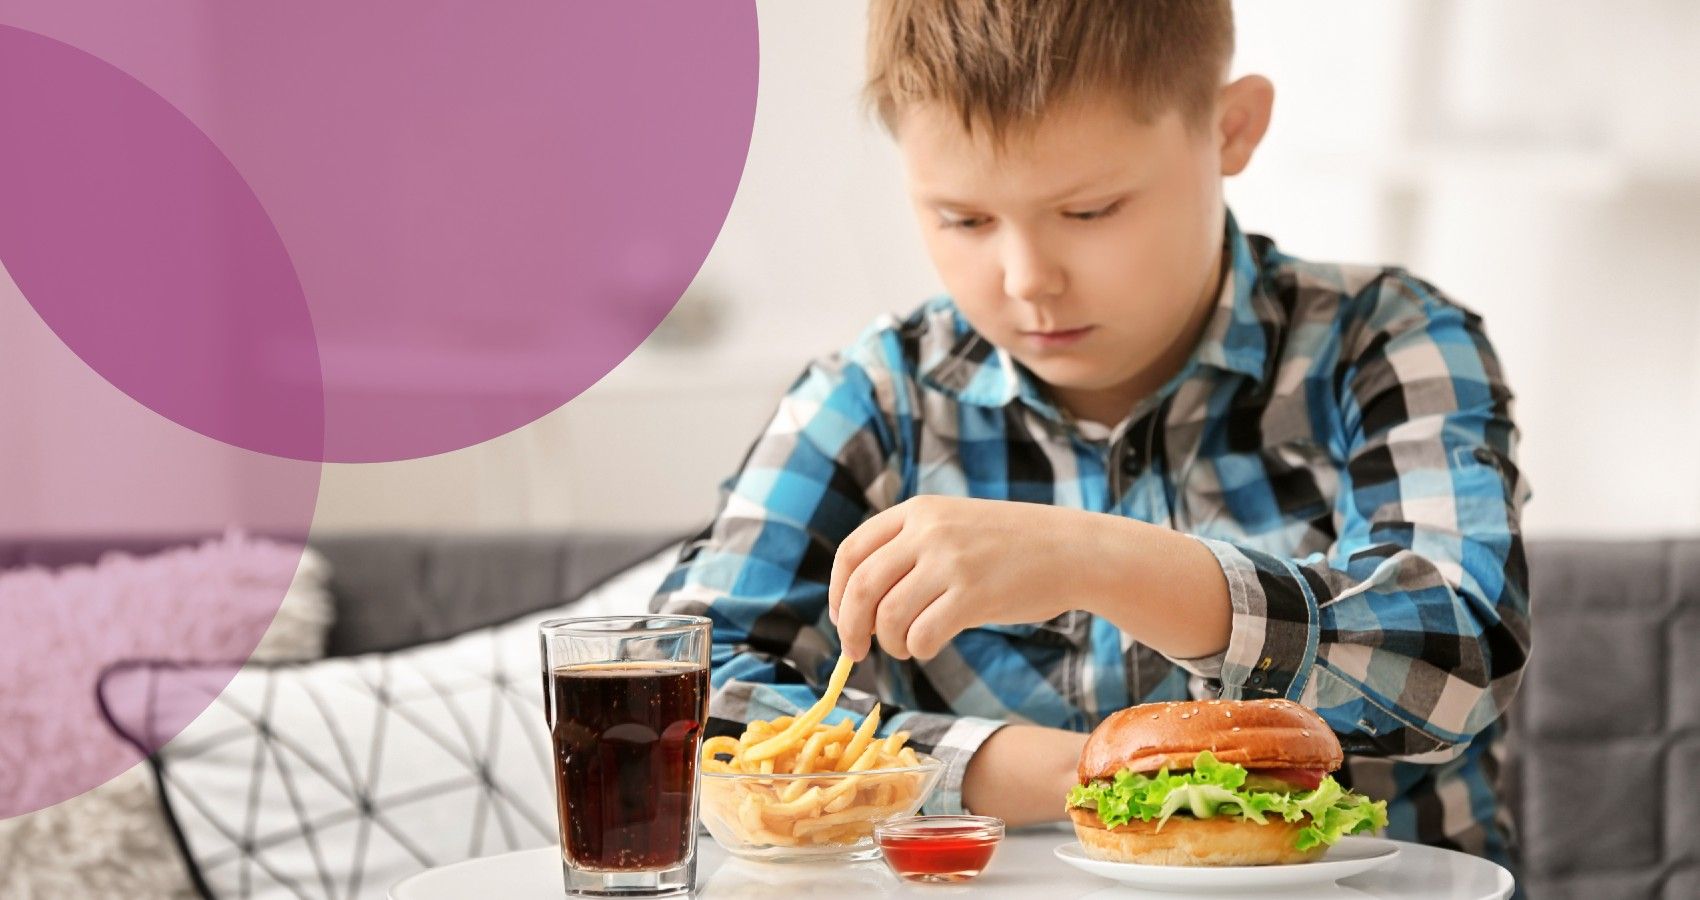 If Parents Can't Afford Fun Trips, They Replace Them With Unhealthy Food